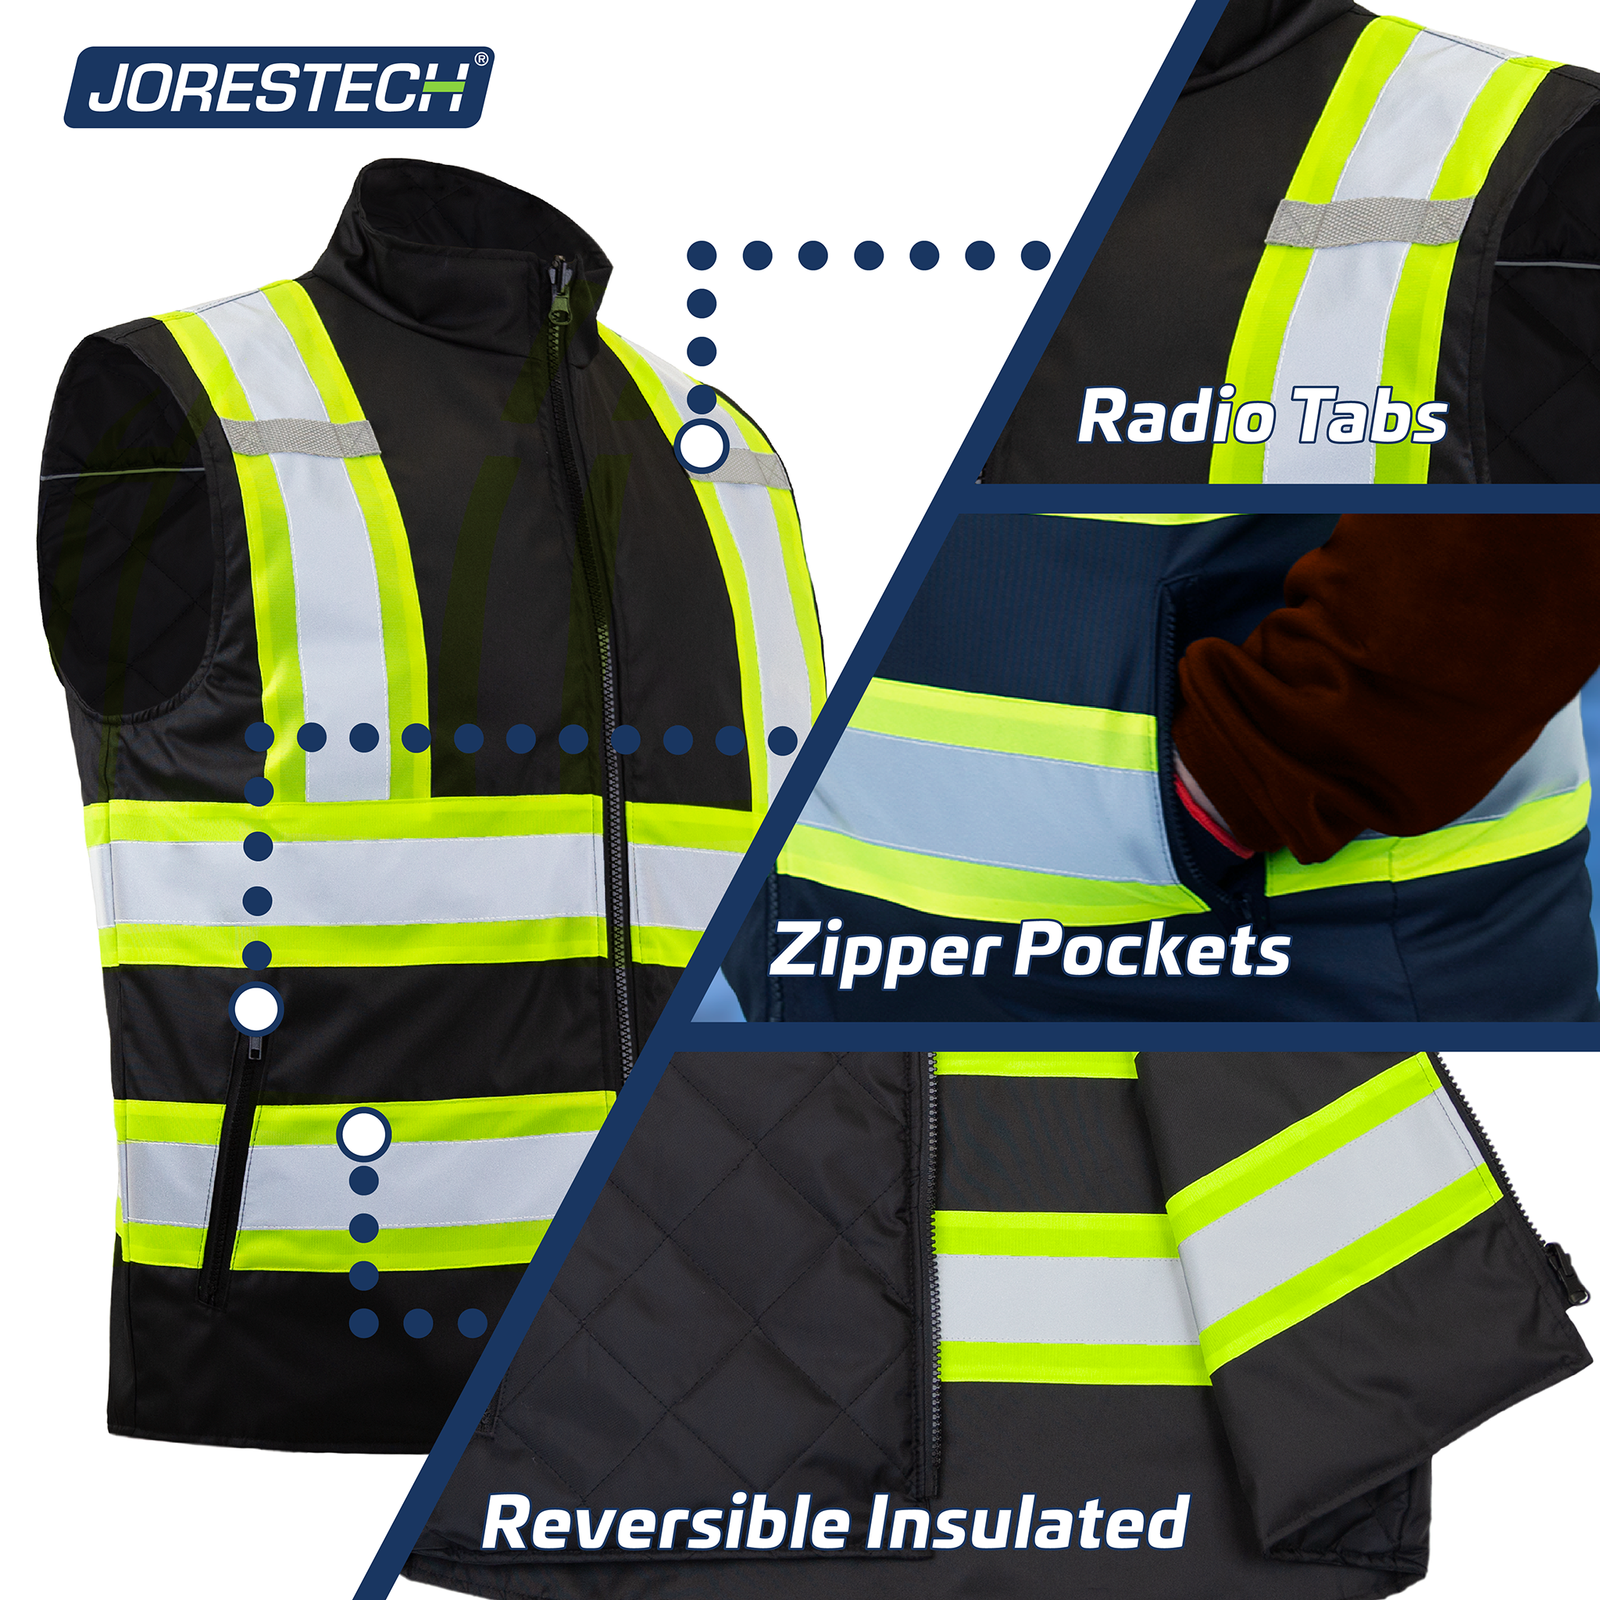 Showing a black JORESTECH insulated safety vest and close ups featuring the radio tabs, the reversible insulated material and the waist zippered pockets